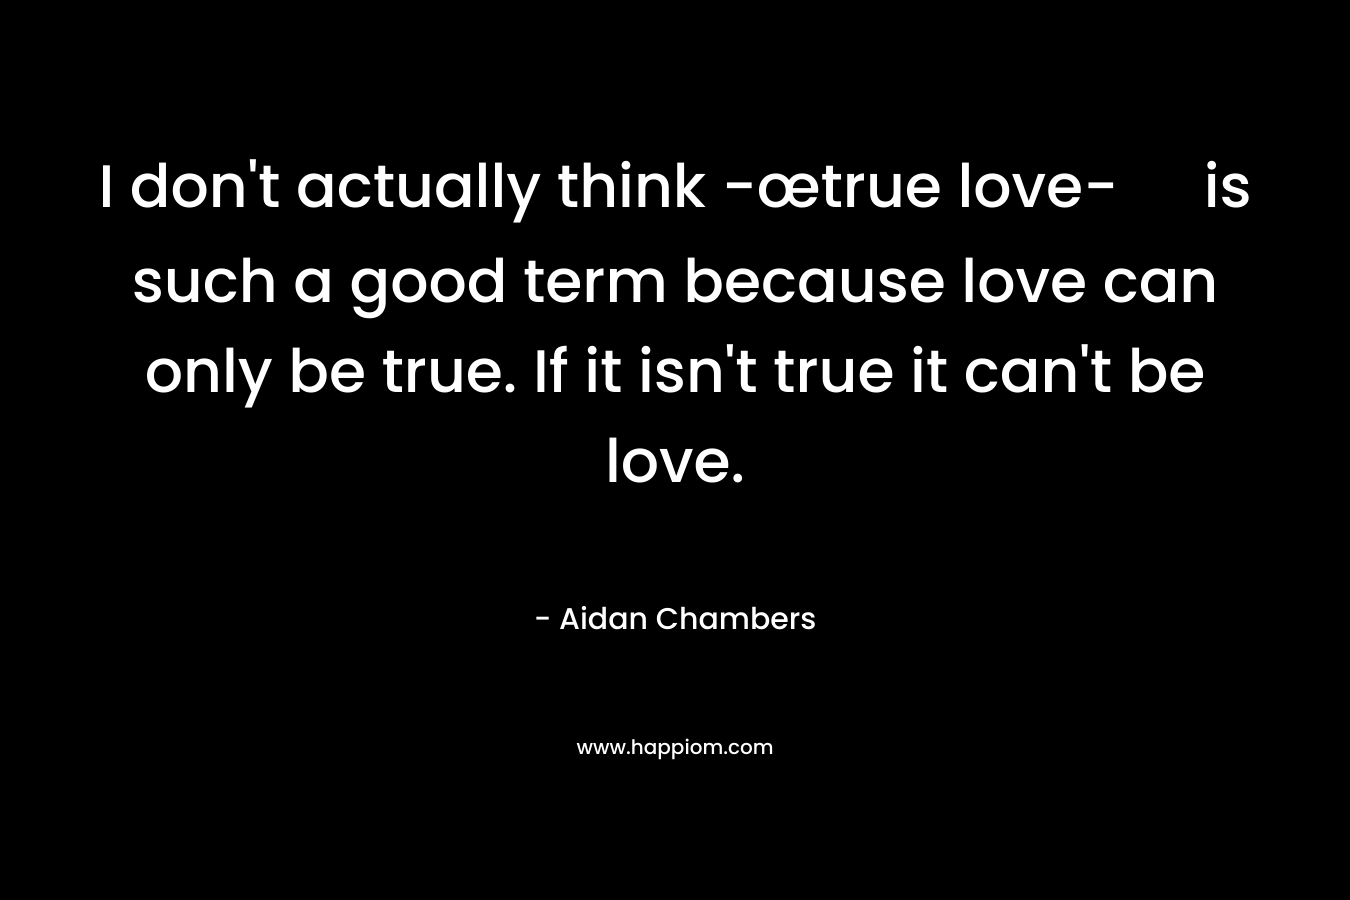 I don't actually think -œtrue love- is such a good term because love can only be true. If it isn't true it can't be love.